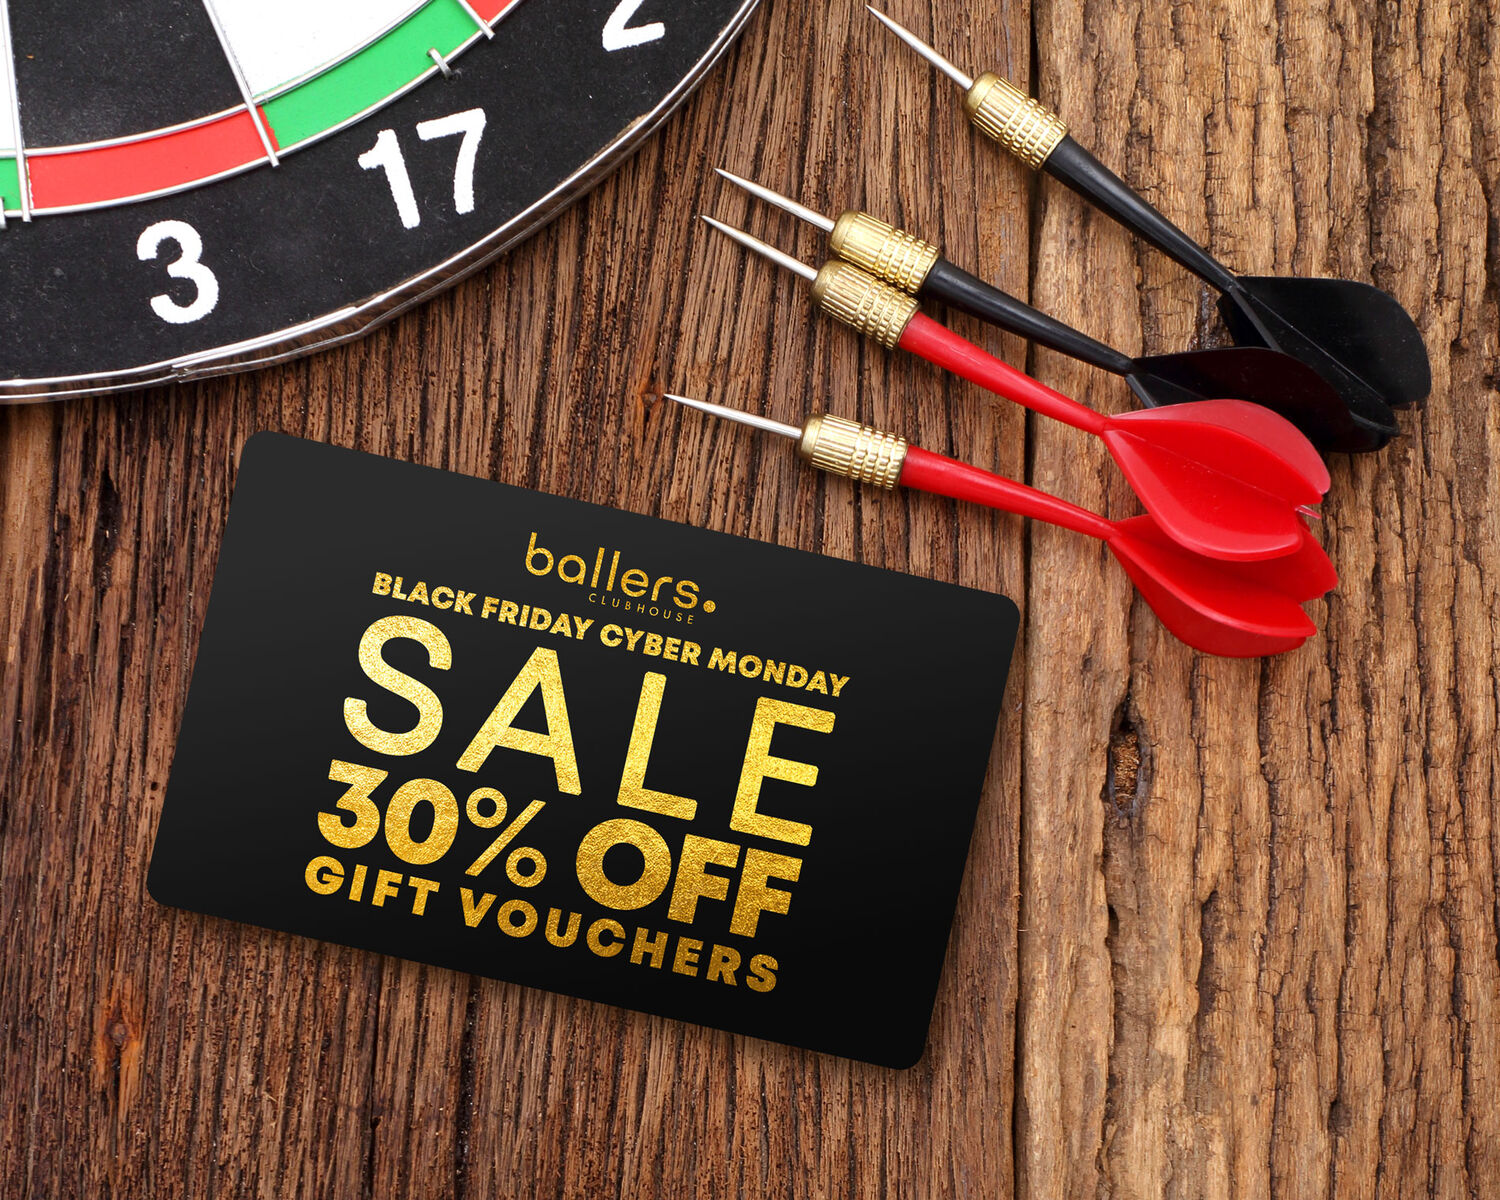 Black Friday Cyber Monday SALE | 30% OFF Gift Vouchers! | Christmas Gift Ideas | Carlton Melbourne | Ballers Clubhouse